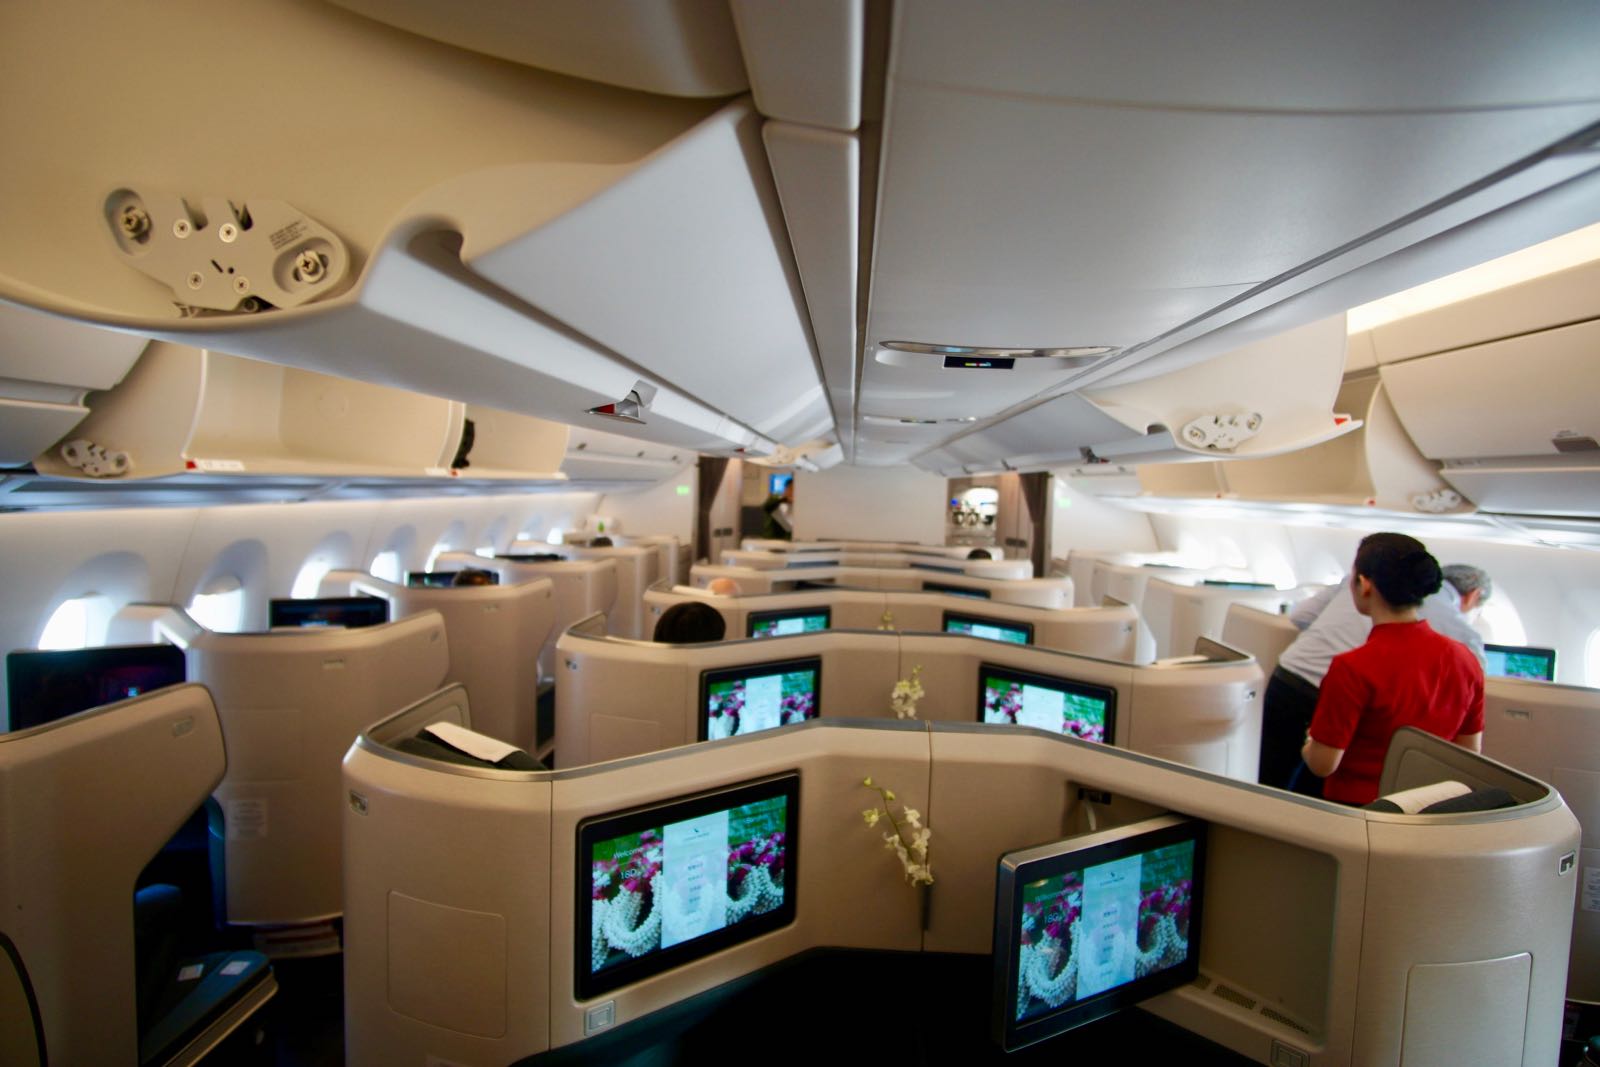 Cathay Pacific A350 Business Class Cabin 1-2-1